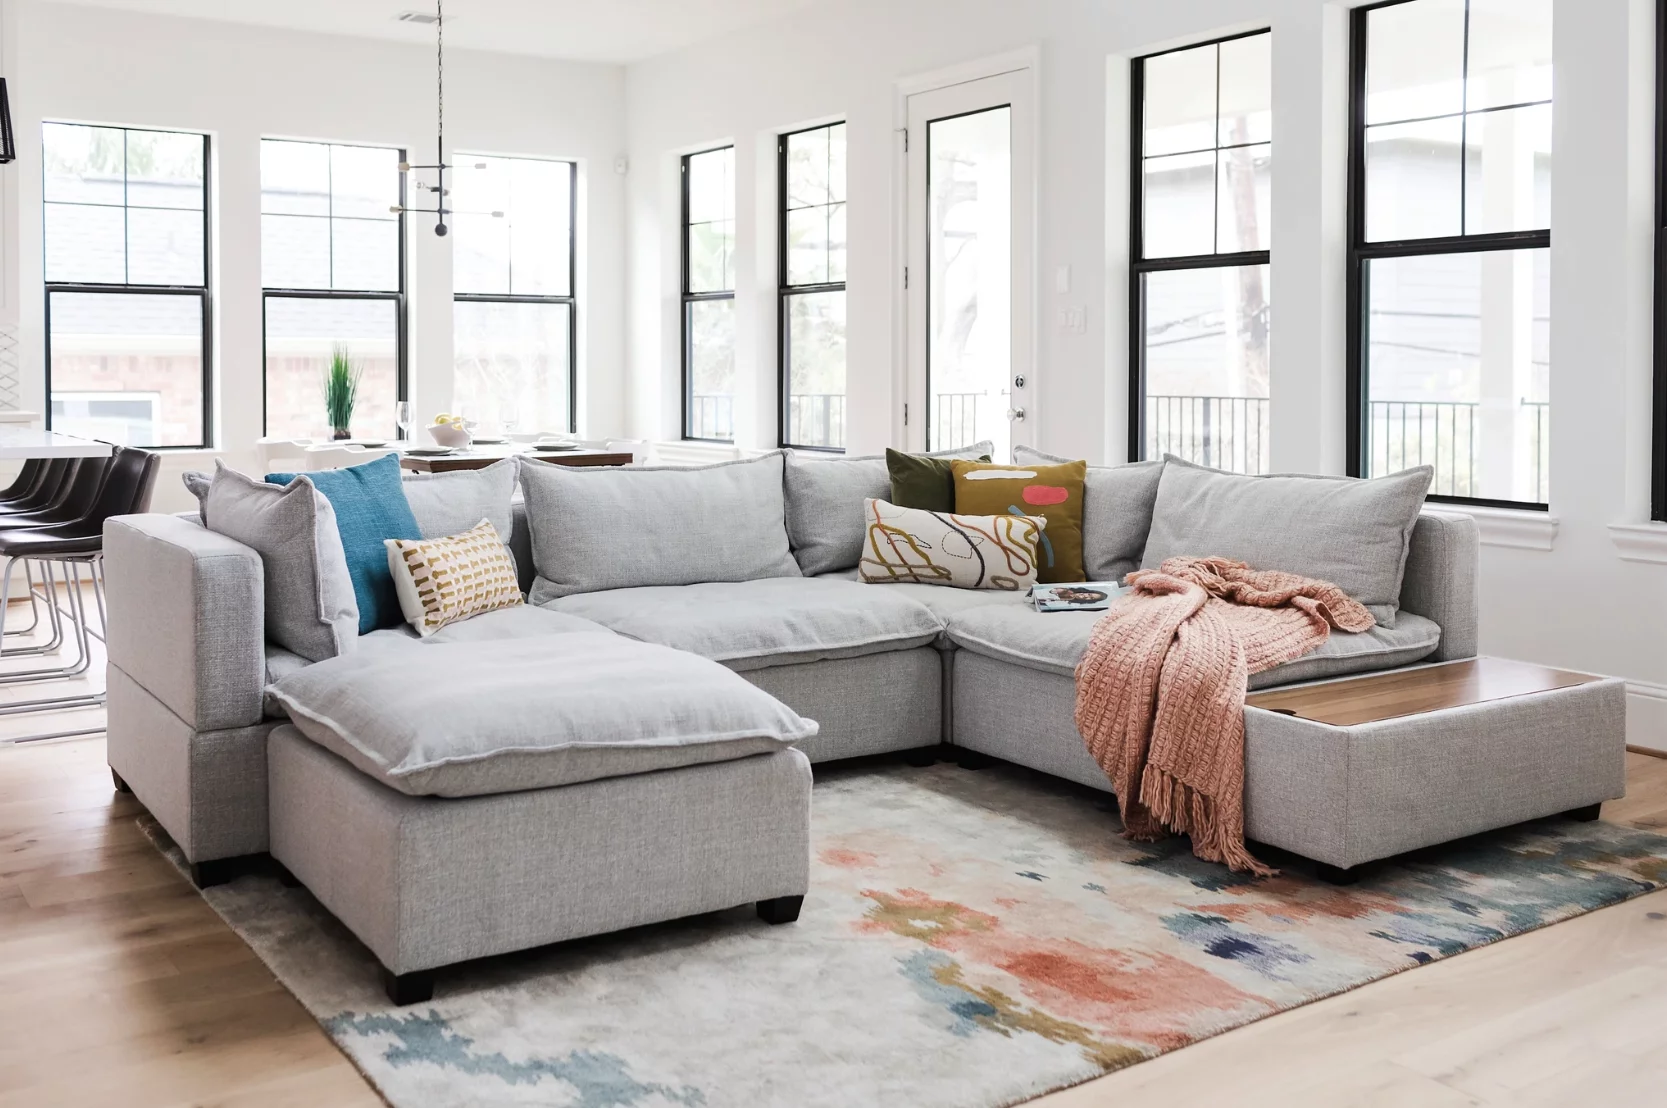 How to Find Comfy Sectionals and Sofas Easily